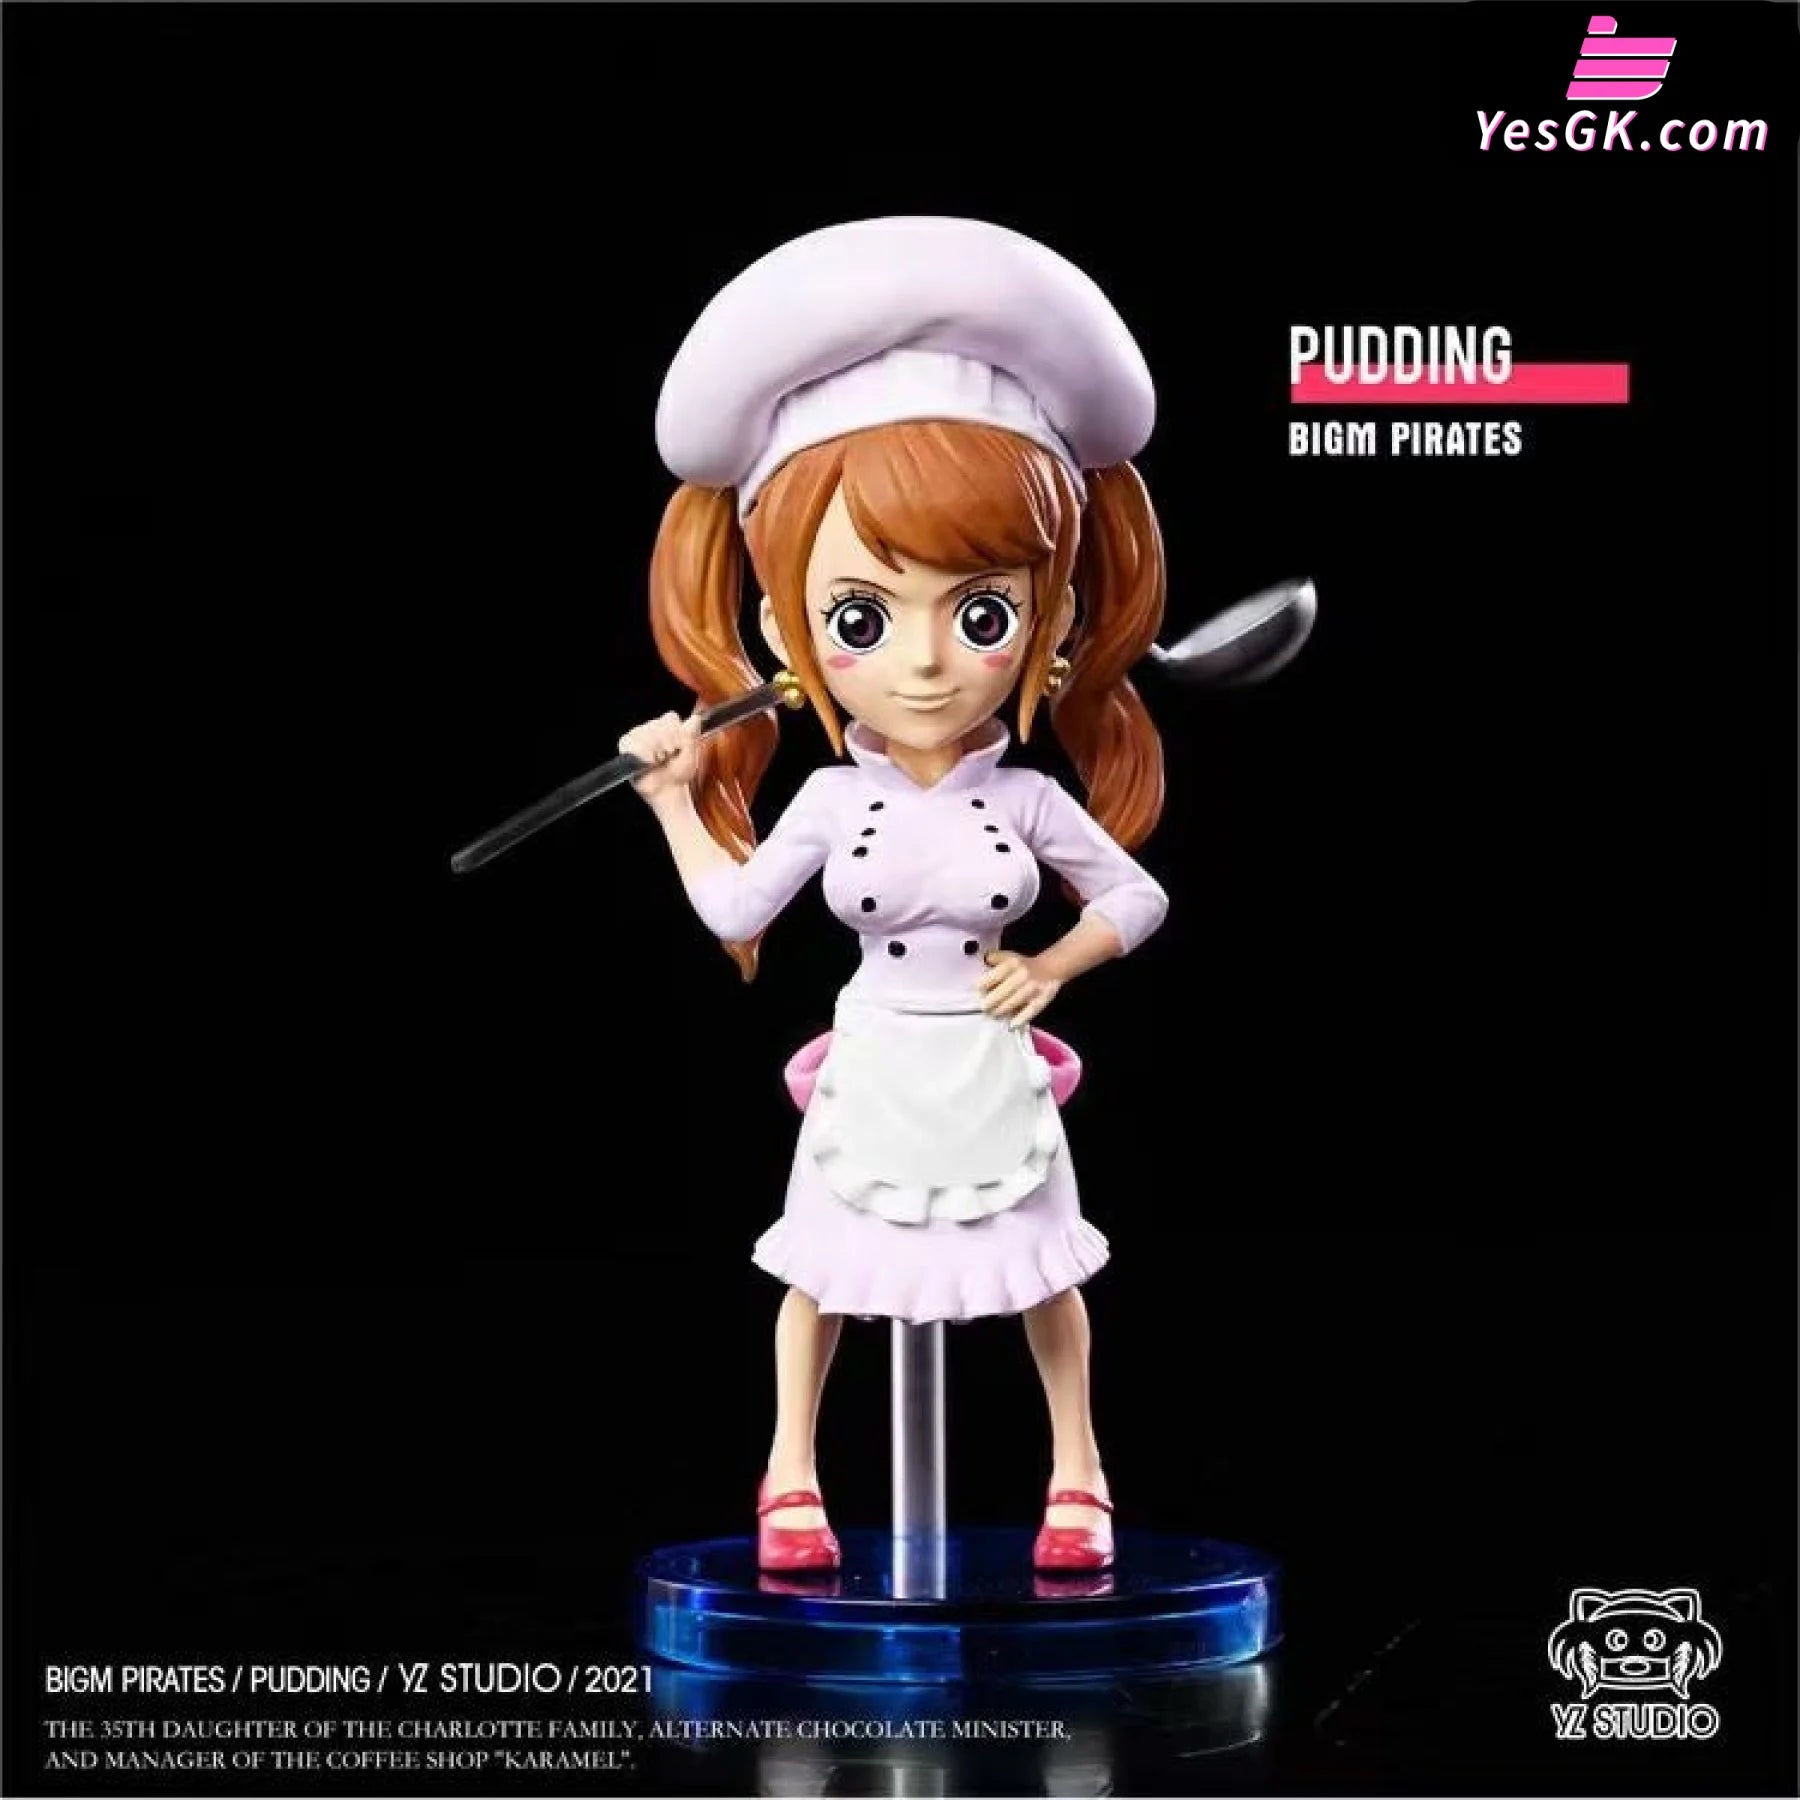 One Piece Big Mom Pirates Charlotte Pudding Resin Statue - Yz Studio [Pre-Order Closed] Full Payment